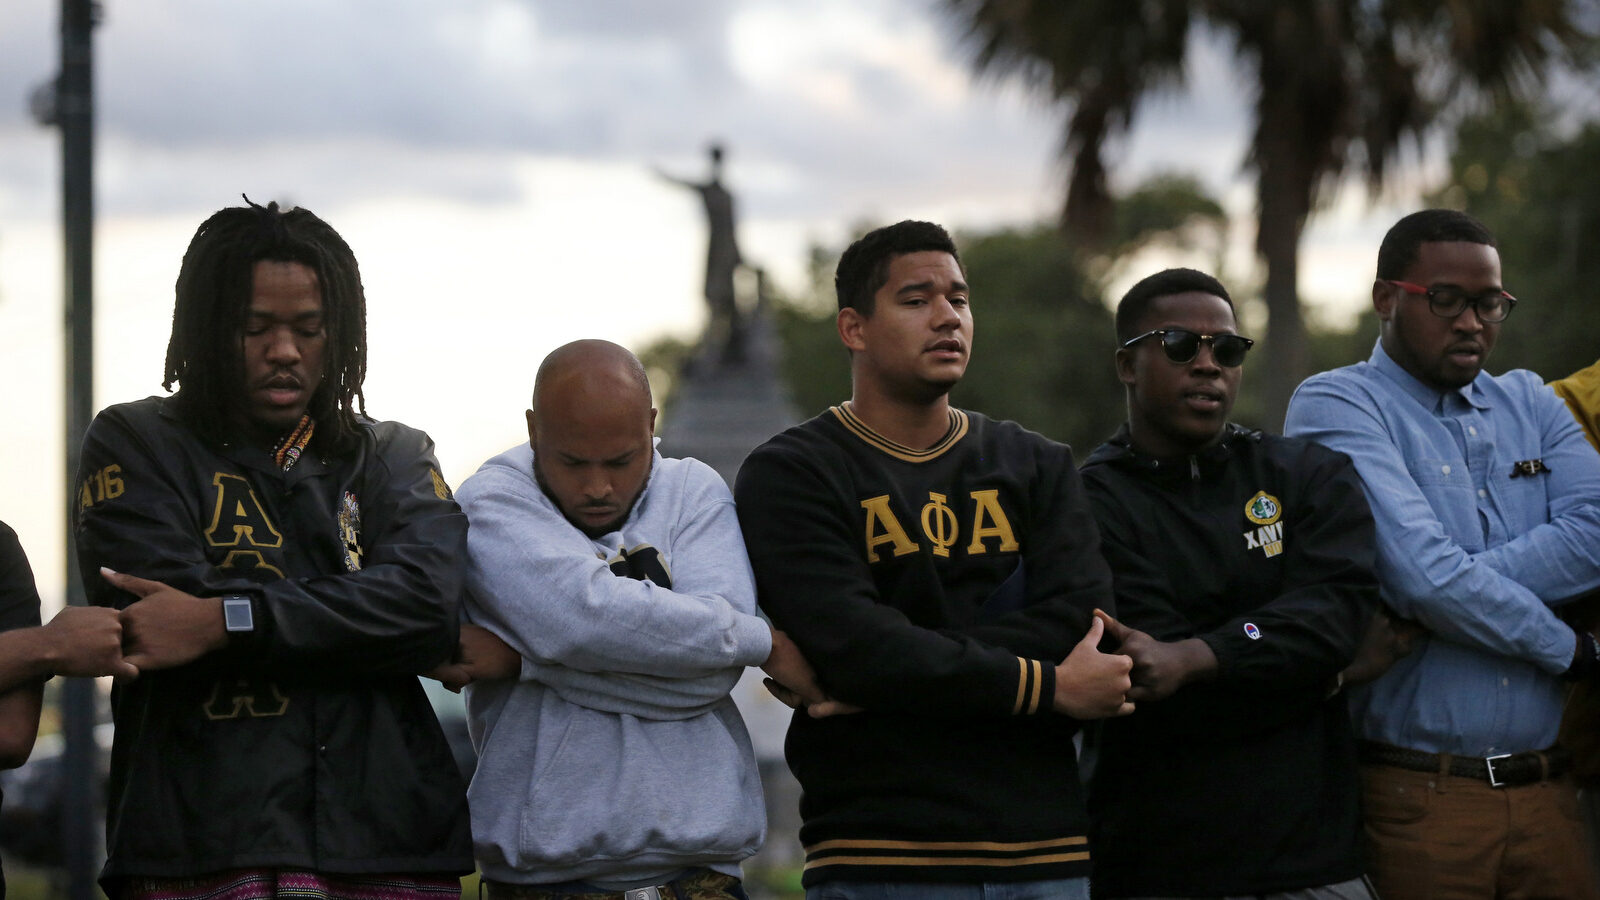 Graduate members of Alpha Phi Alpha Fraternity pray during a "social action prayer vigil" across the street from the Jefferson Davis monument in New Orleans, Thursday, May 4, 2017. The group supports the removal of confederate monuments, and New Orleans Mayor Mitch Landrieu has removed one already and vowed to remove several more, one of which is the Jefferson Davis monument. (AP/Gerald Herbert)